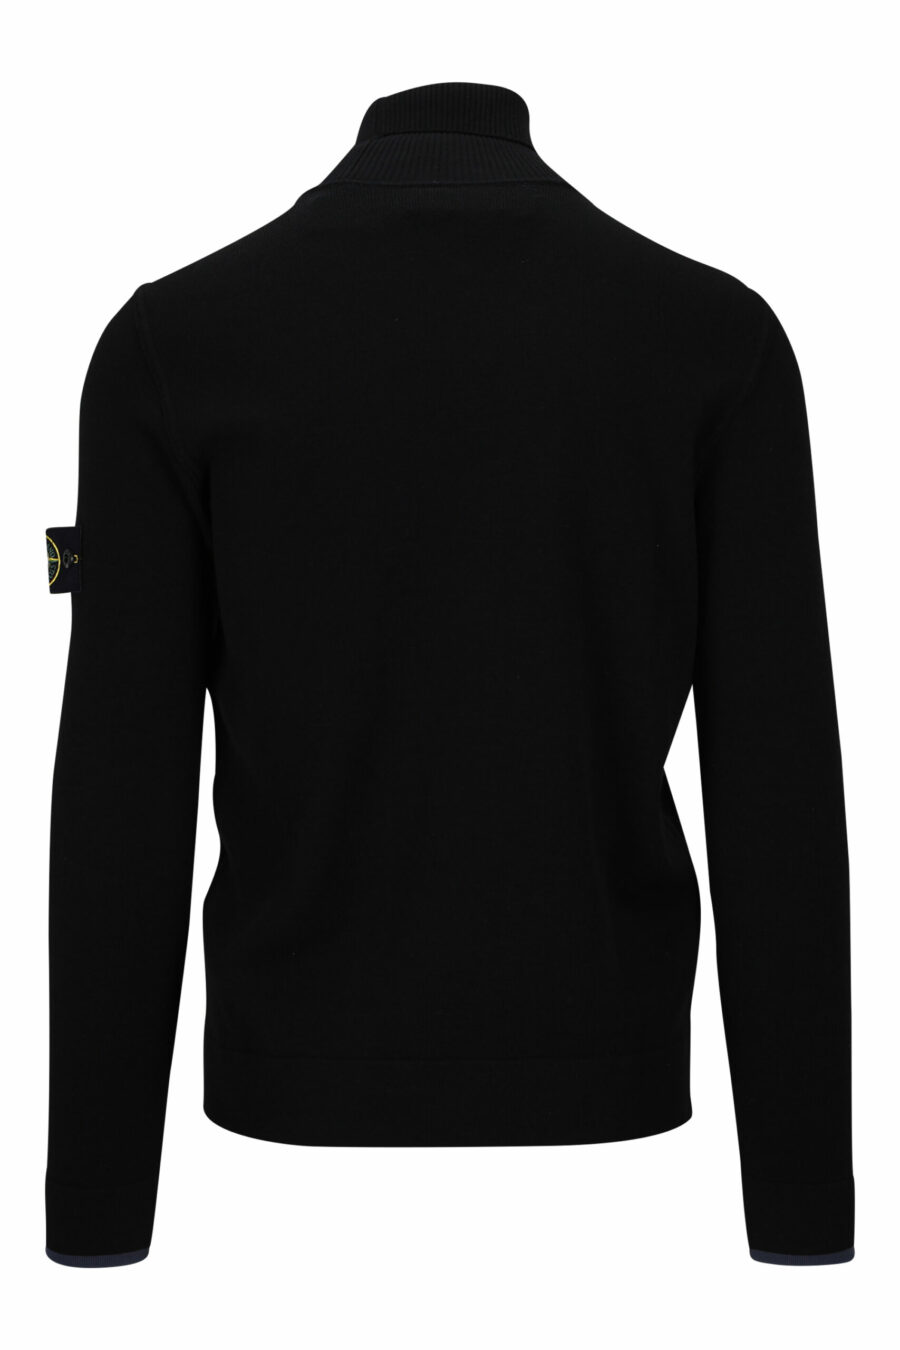 Black sweatshirt with high collar and side logo patch - 8052572741814 2 scaled